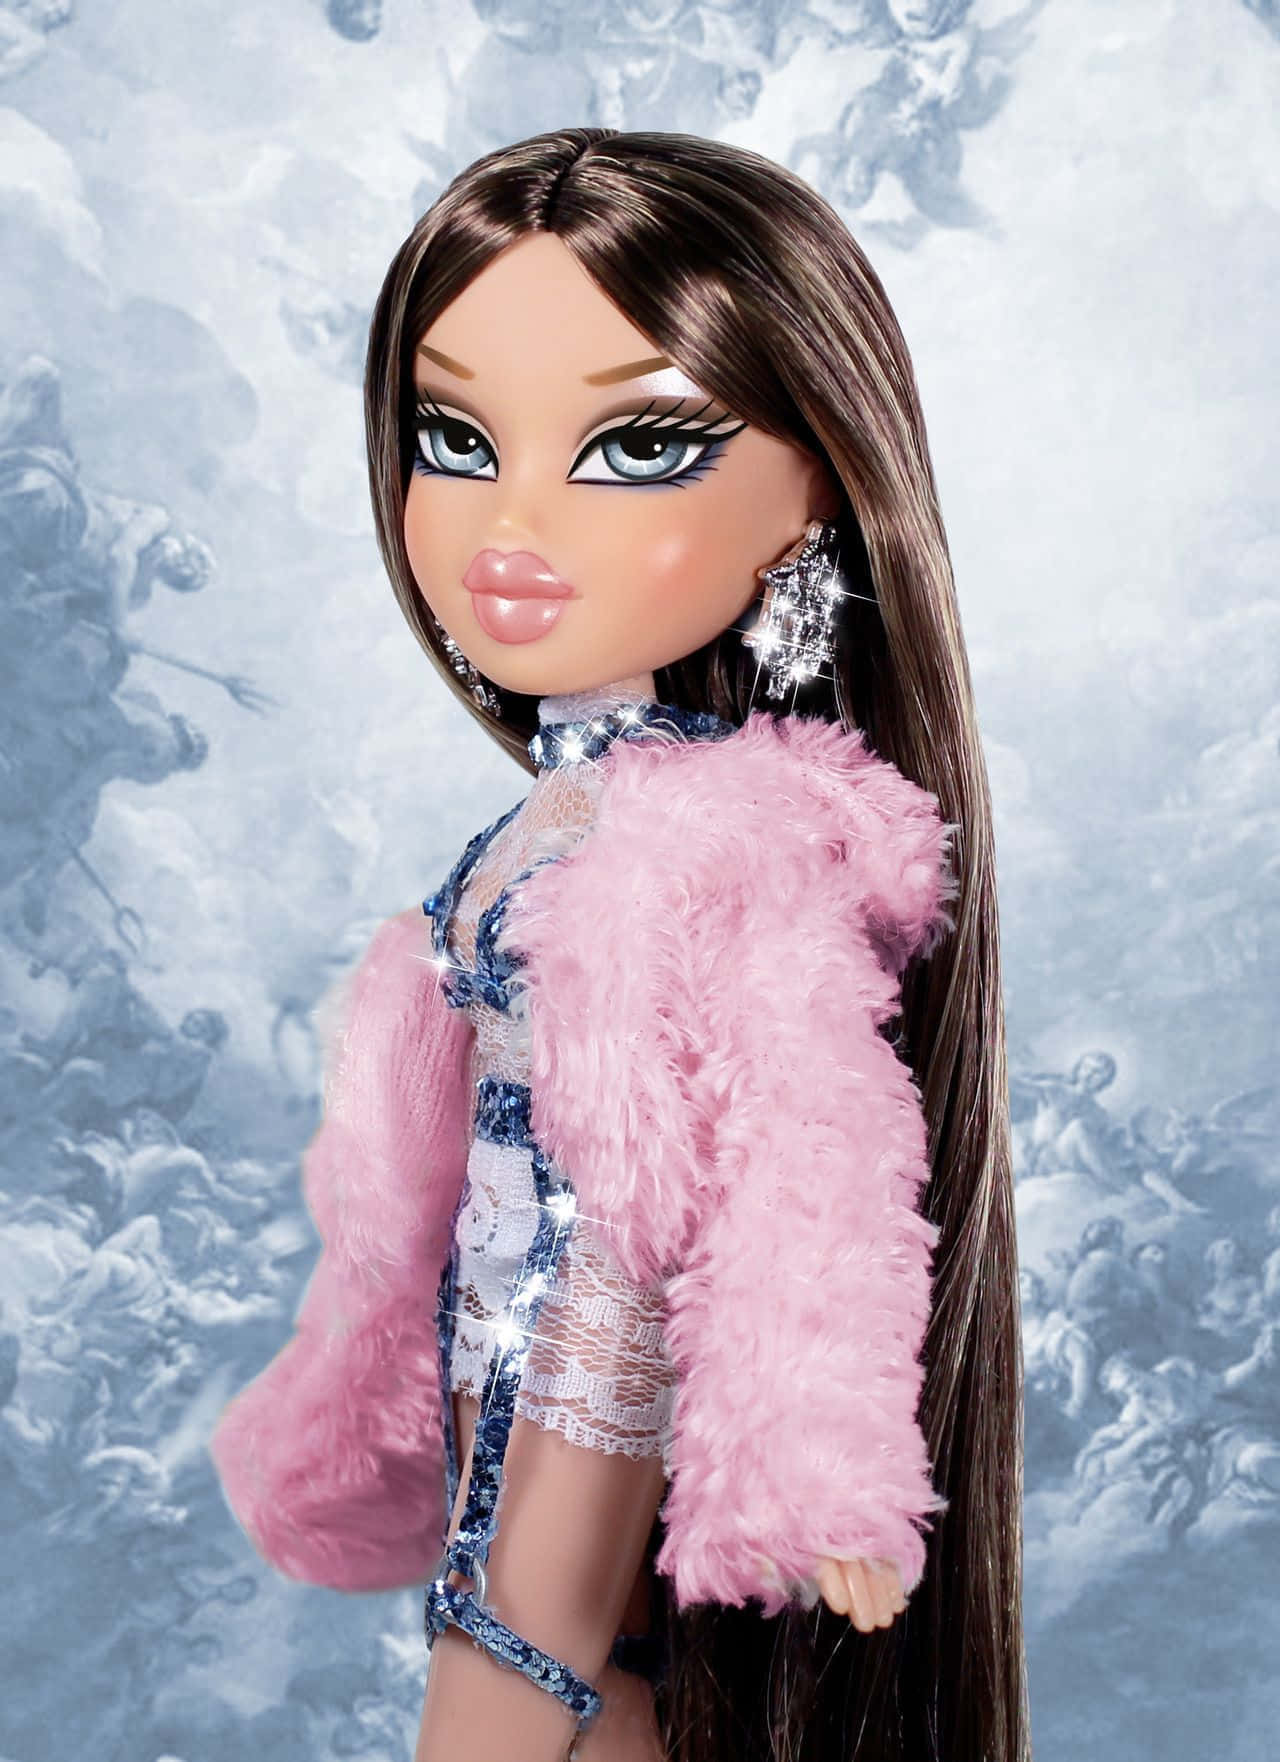 Live the life of your dreams with Bratz Aesthetic